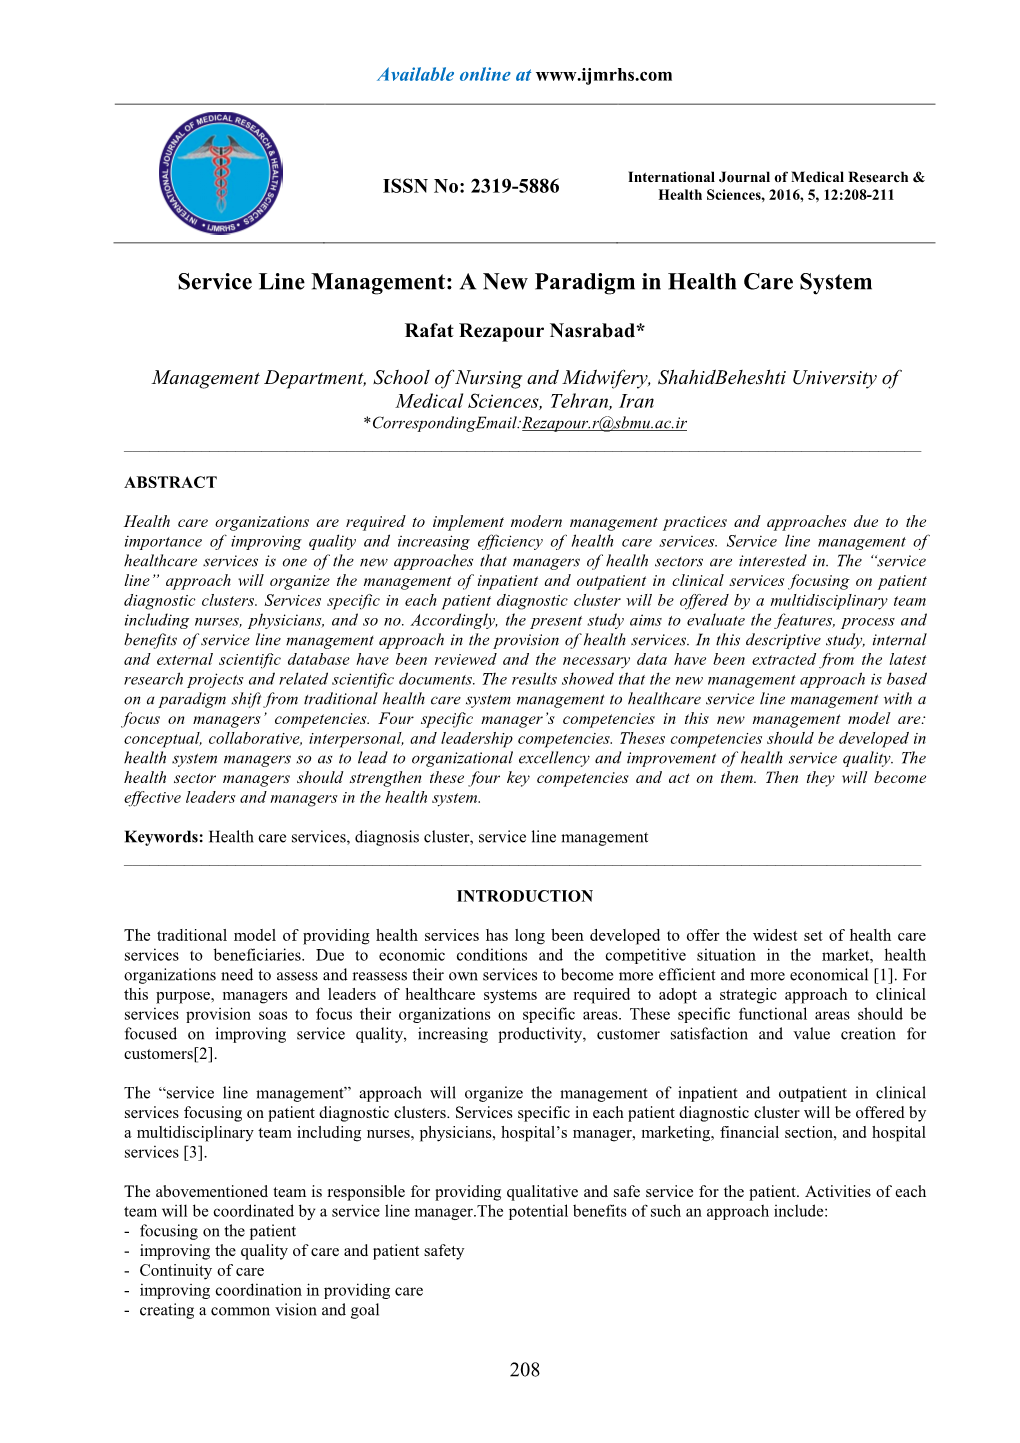 Service Line Management: a New Paradigm in Health Care System